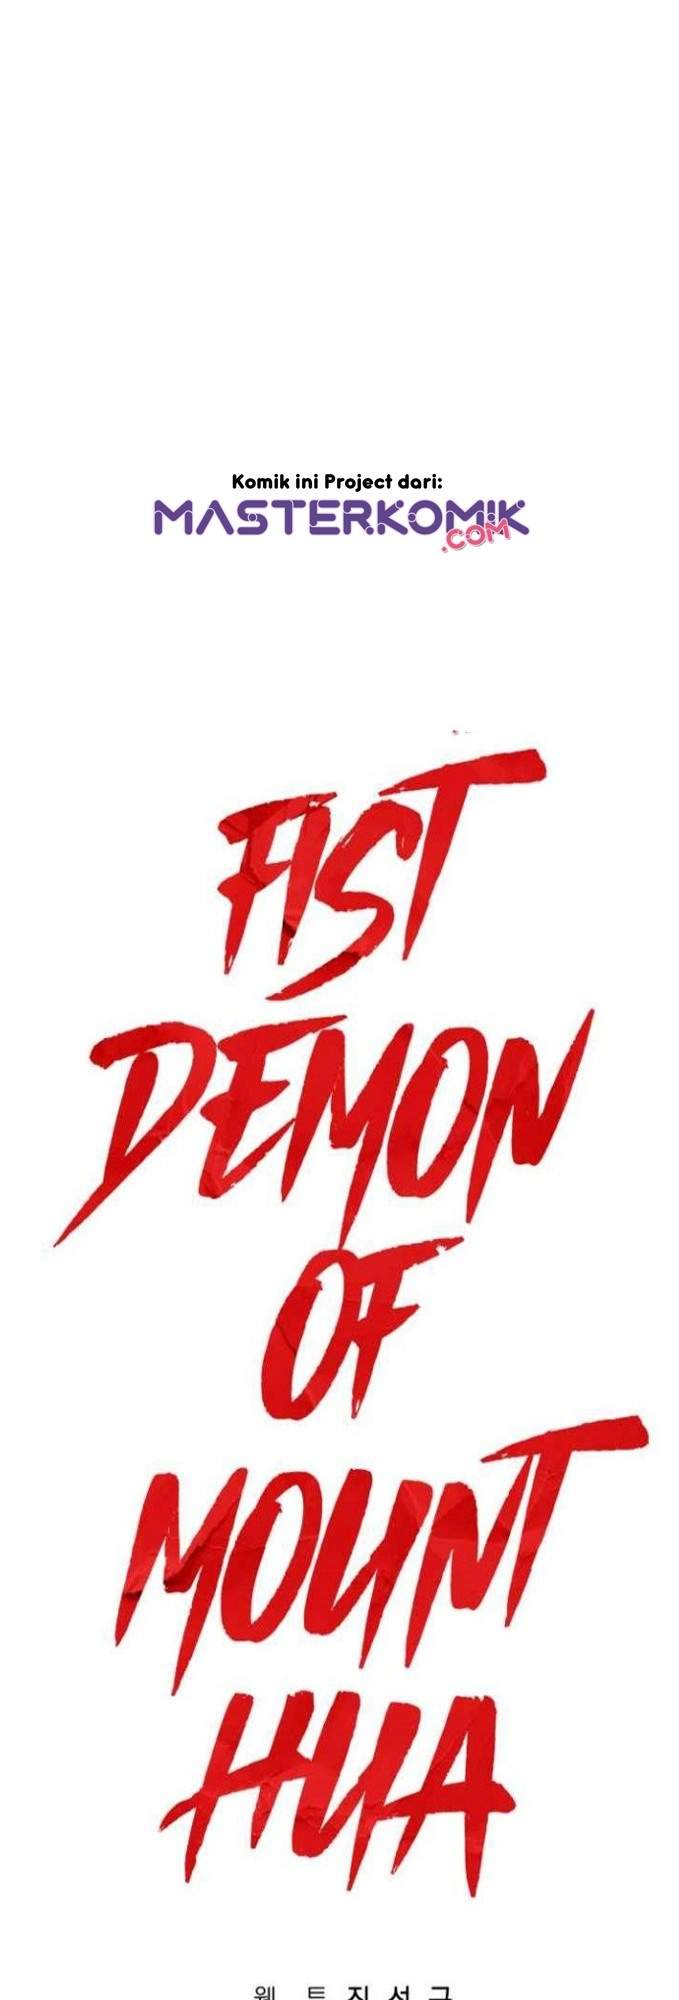 Fist Demon Of Mount Hua Chapter 40